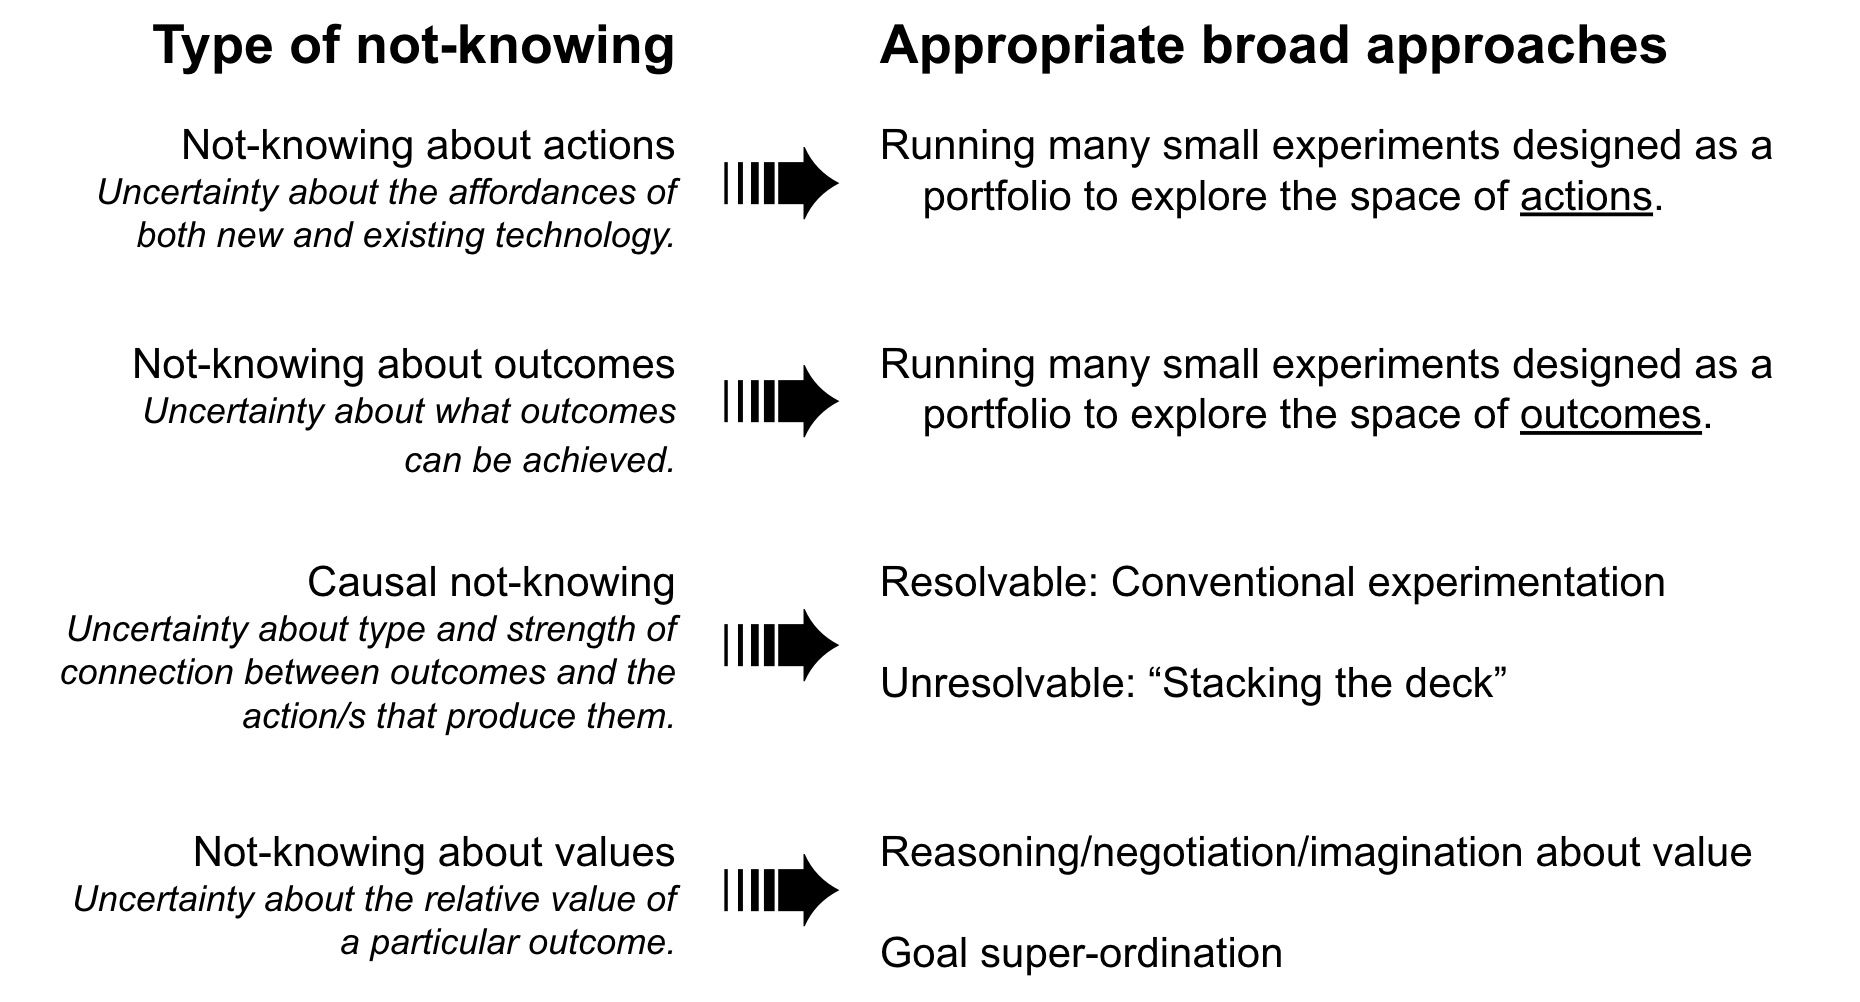 Different broad approaches for different types of not-knowing.